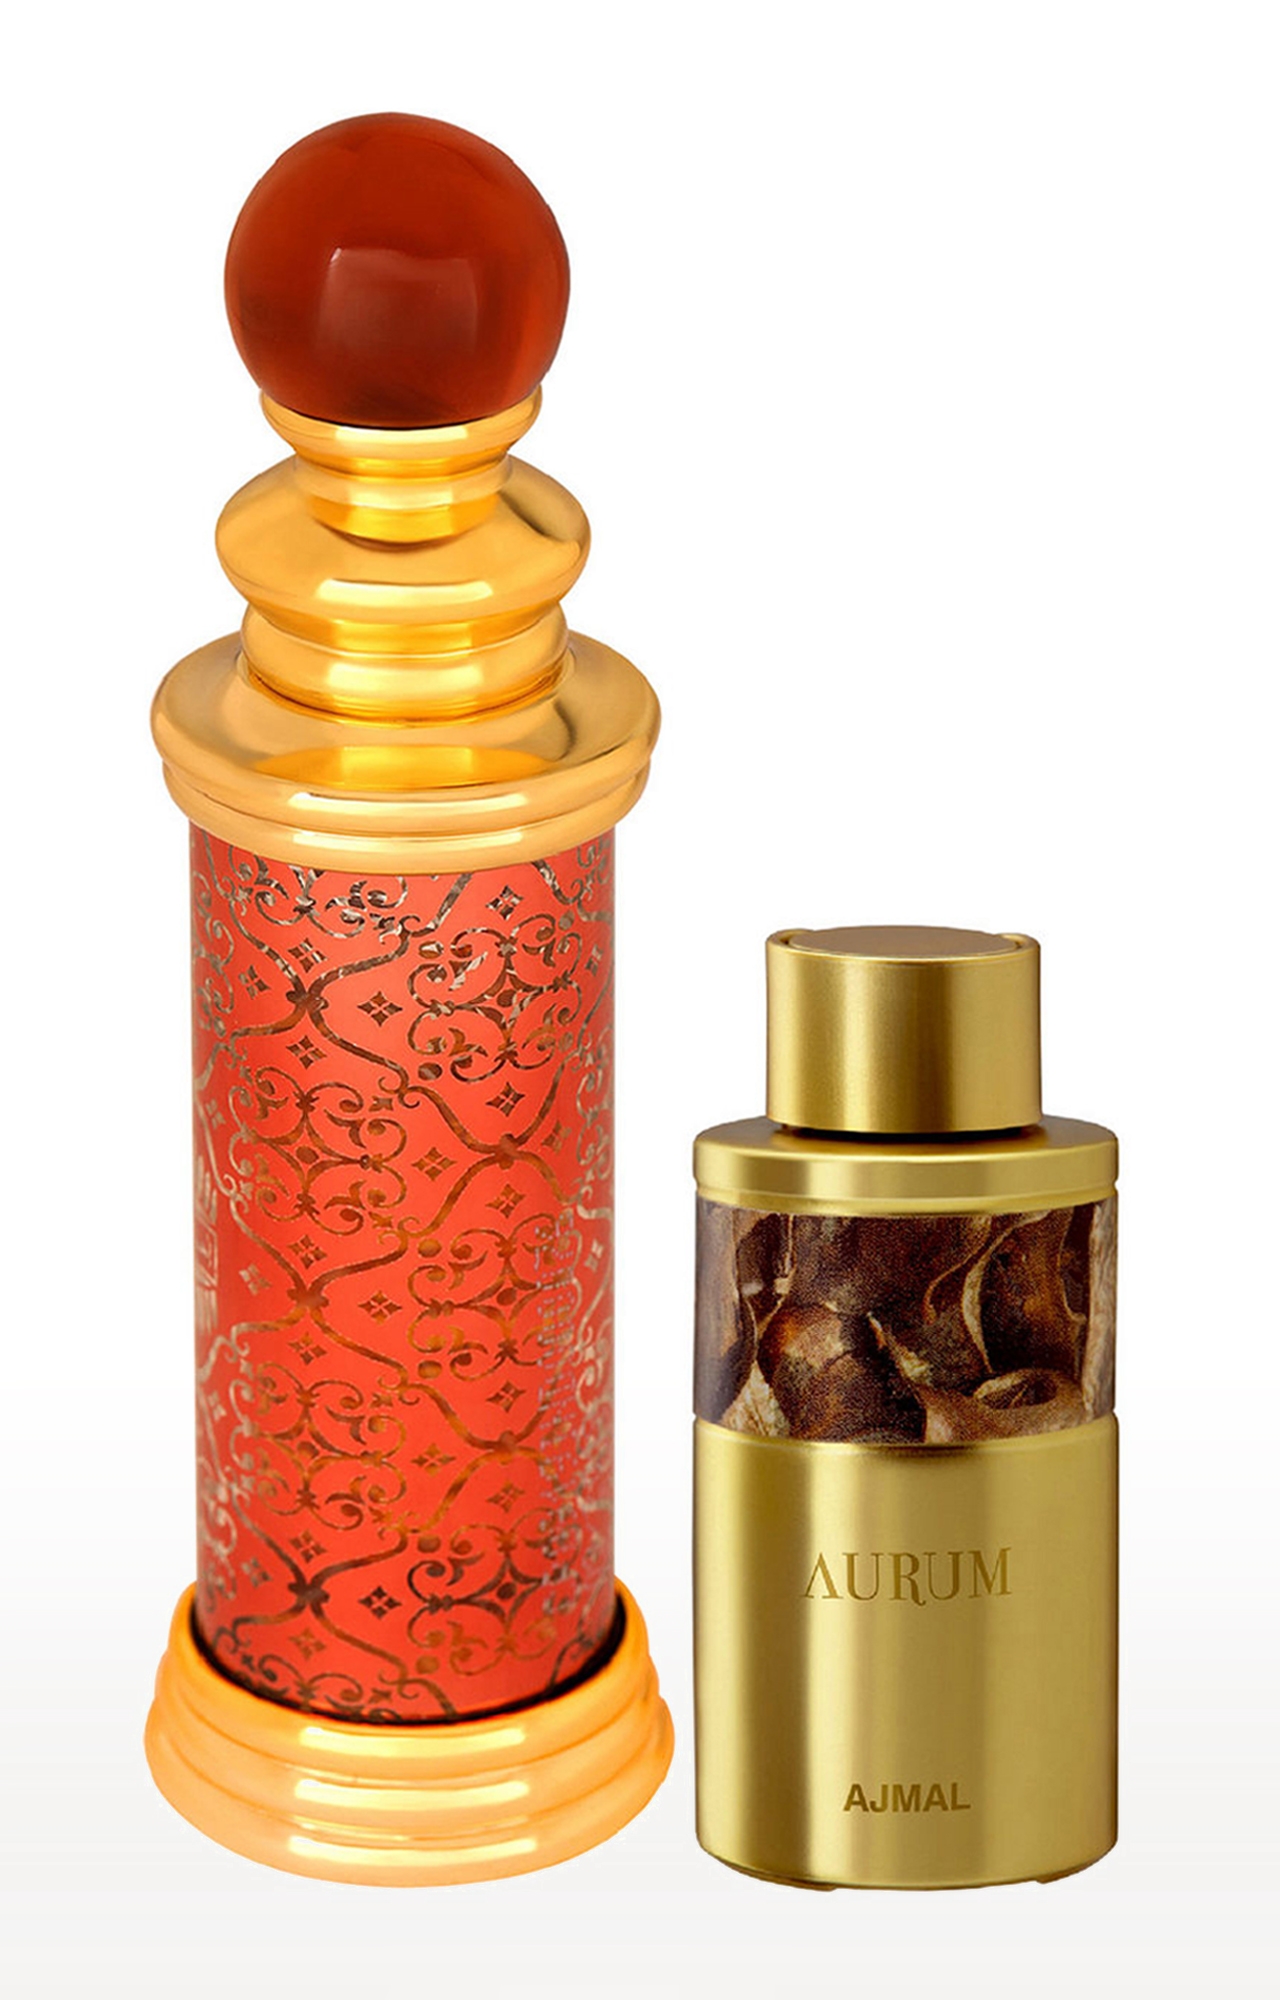 Ajmal Classic Oud Concentrated Perfume Oil Oudh Alcohol-free Attar 10ml for Unisex and Aurum Concentrated Perfume Oil Alcohol-free Attar 10ml for Women